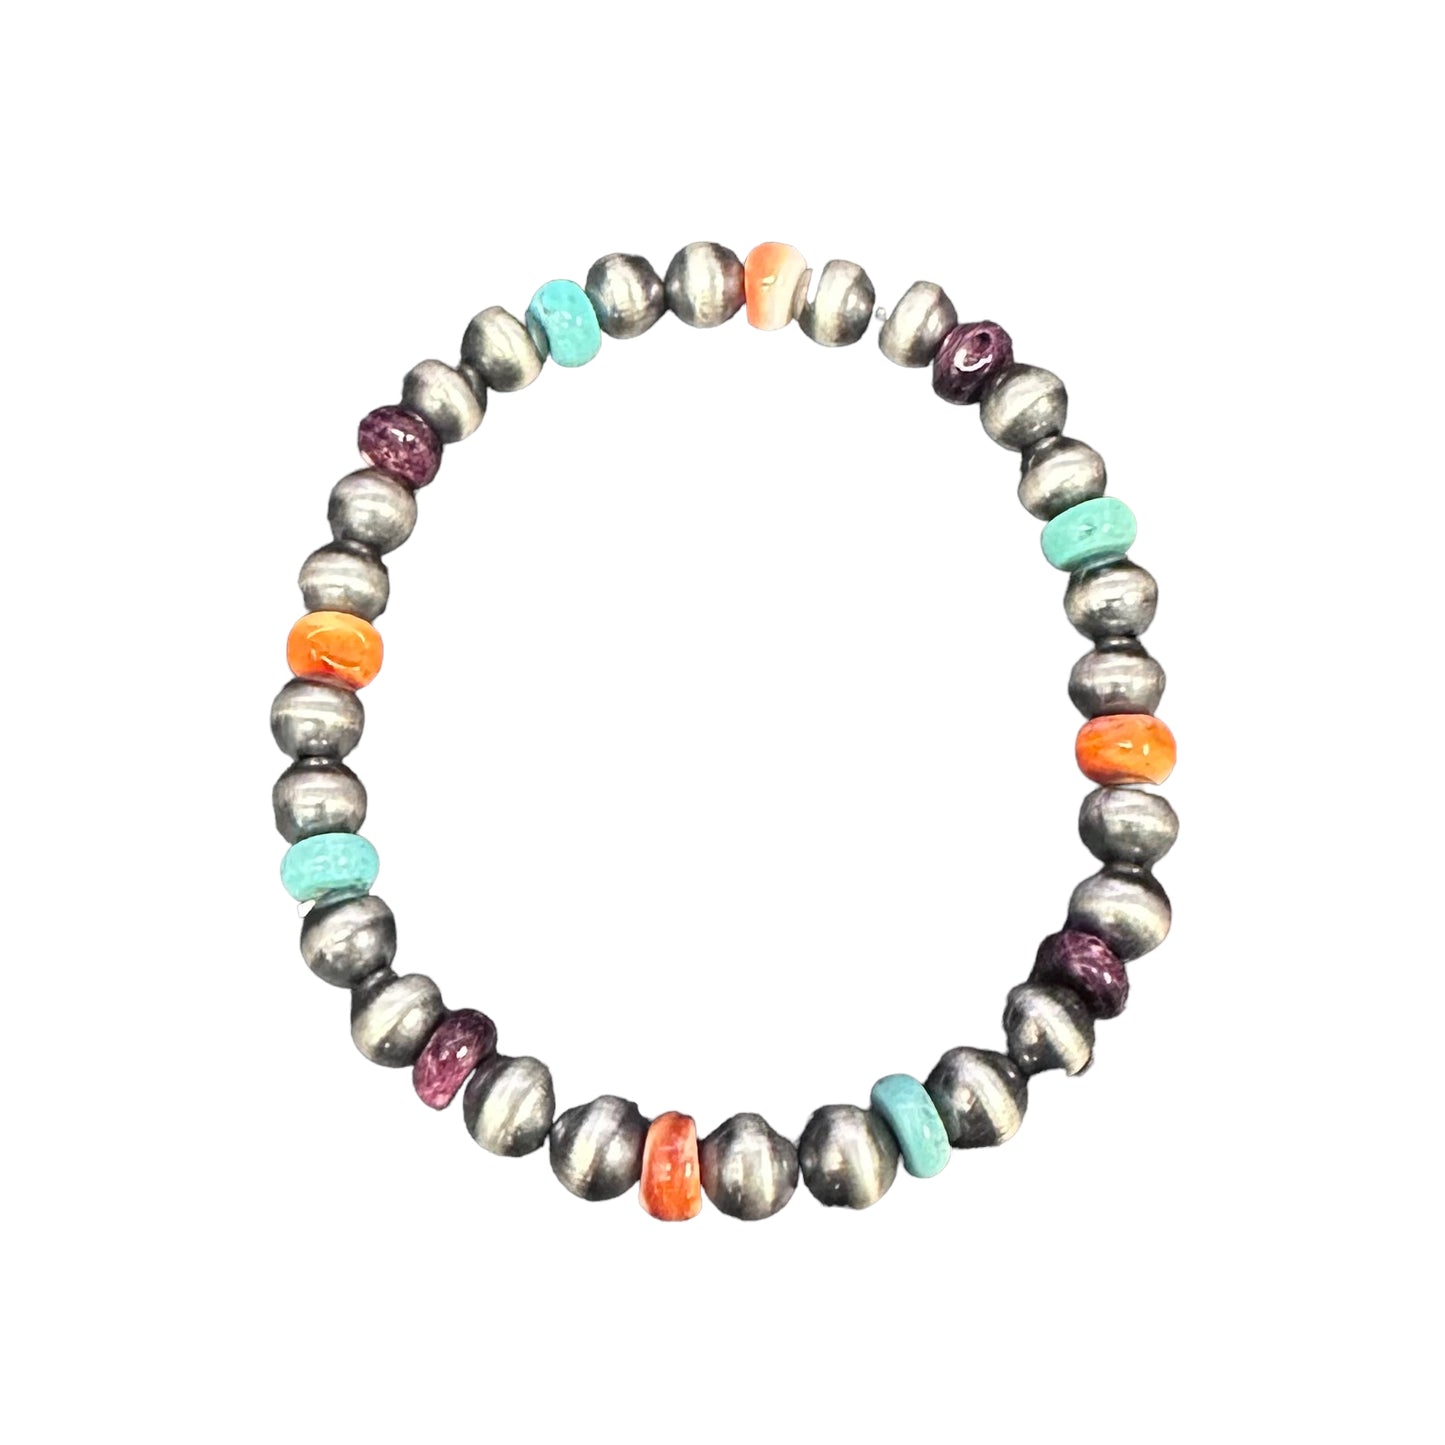 Turquoise & Spiny Oyster Navajo Pearl 6mm Oxidize Bead Stretch Bracelet Sterling Silver